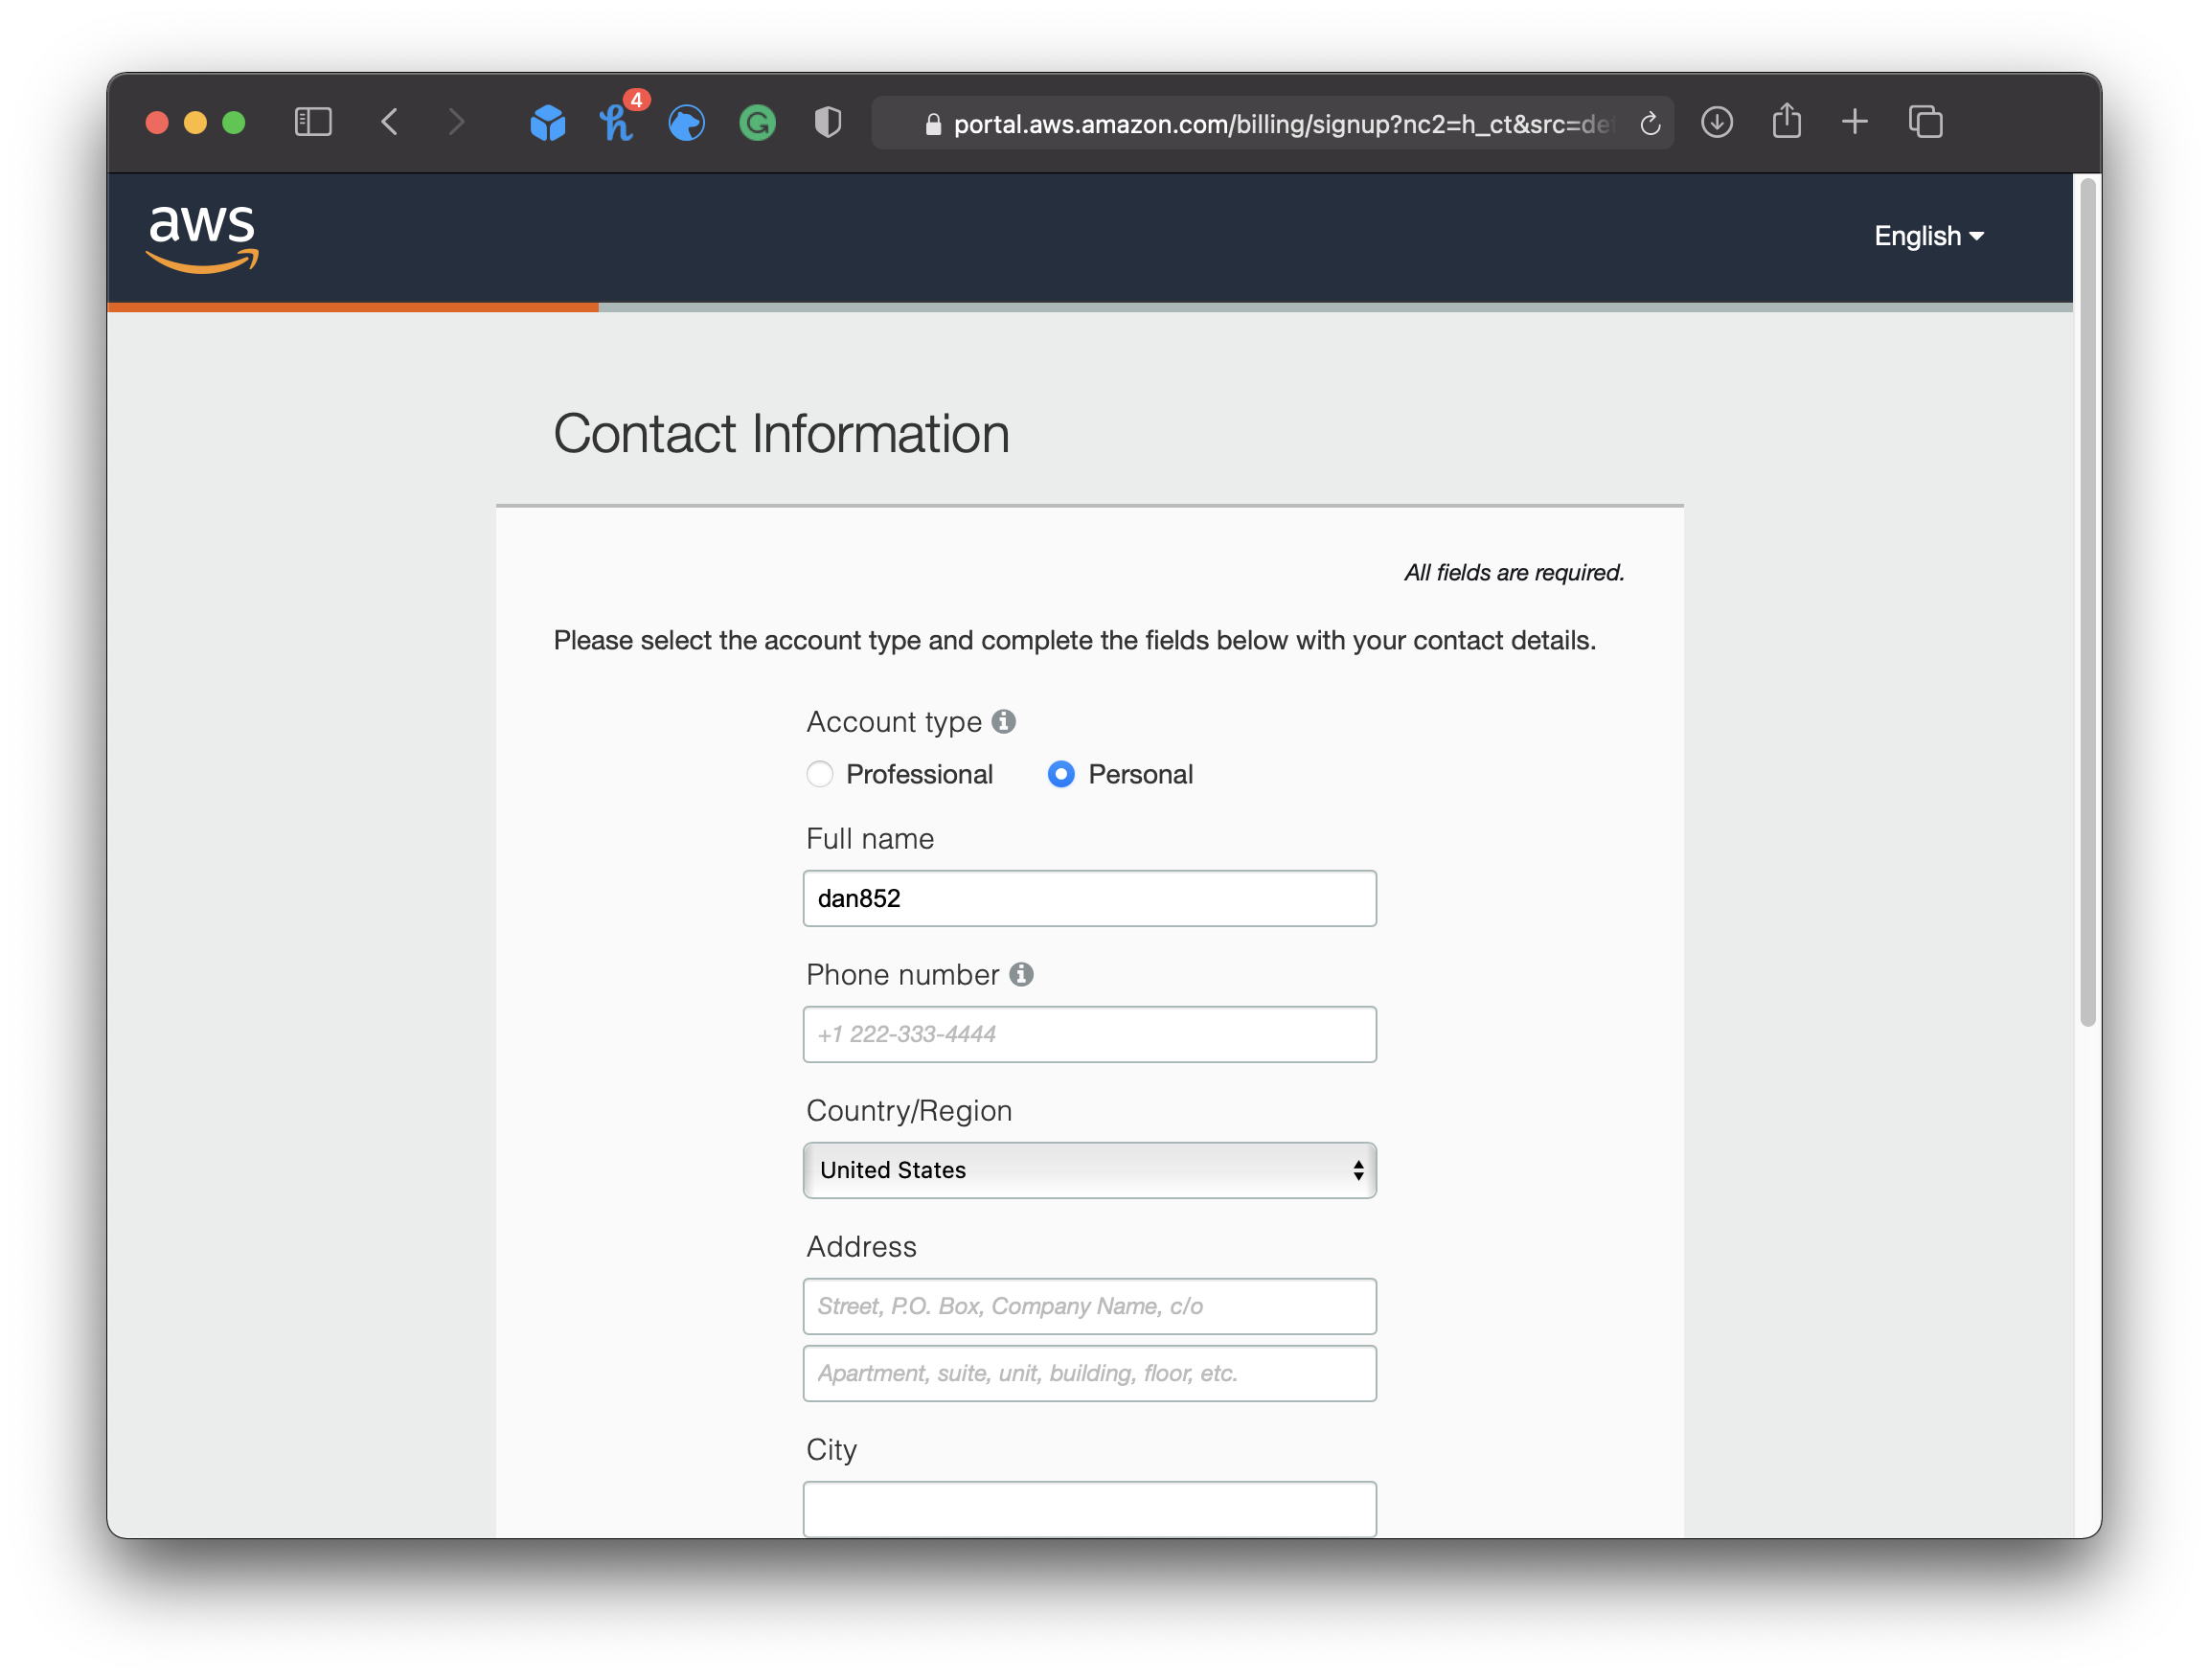 Amazon AWS Contact Information Form